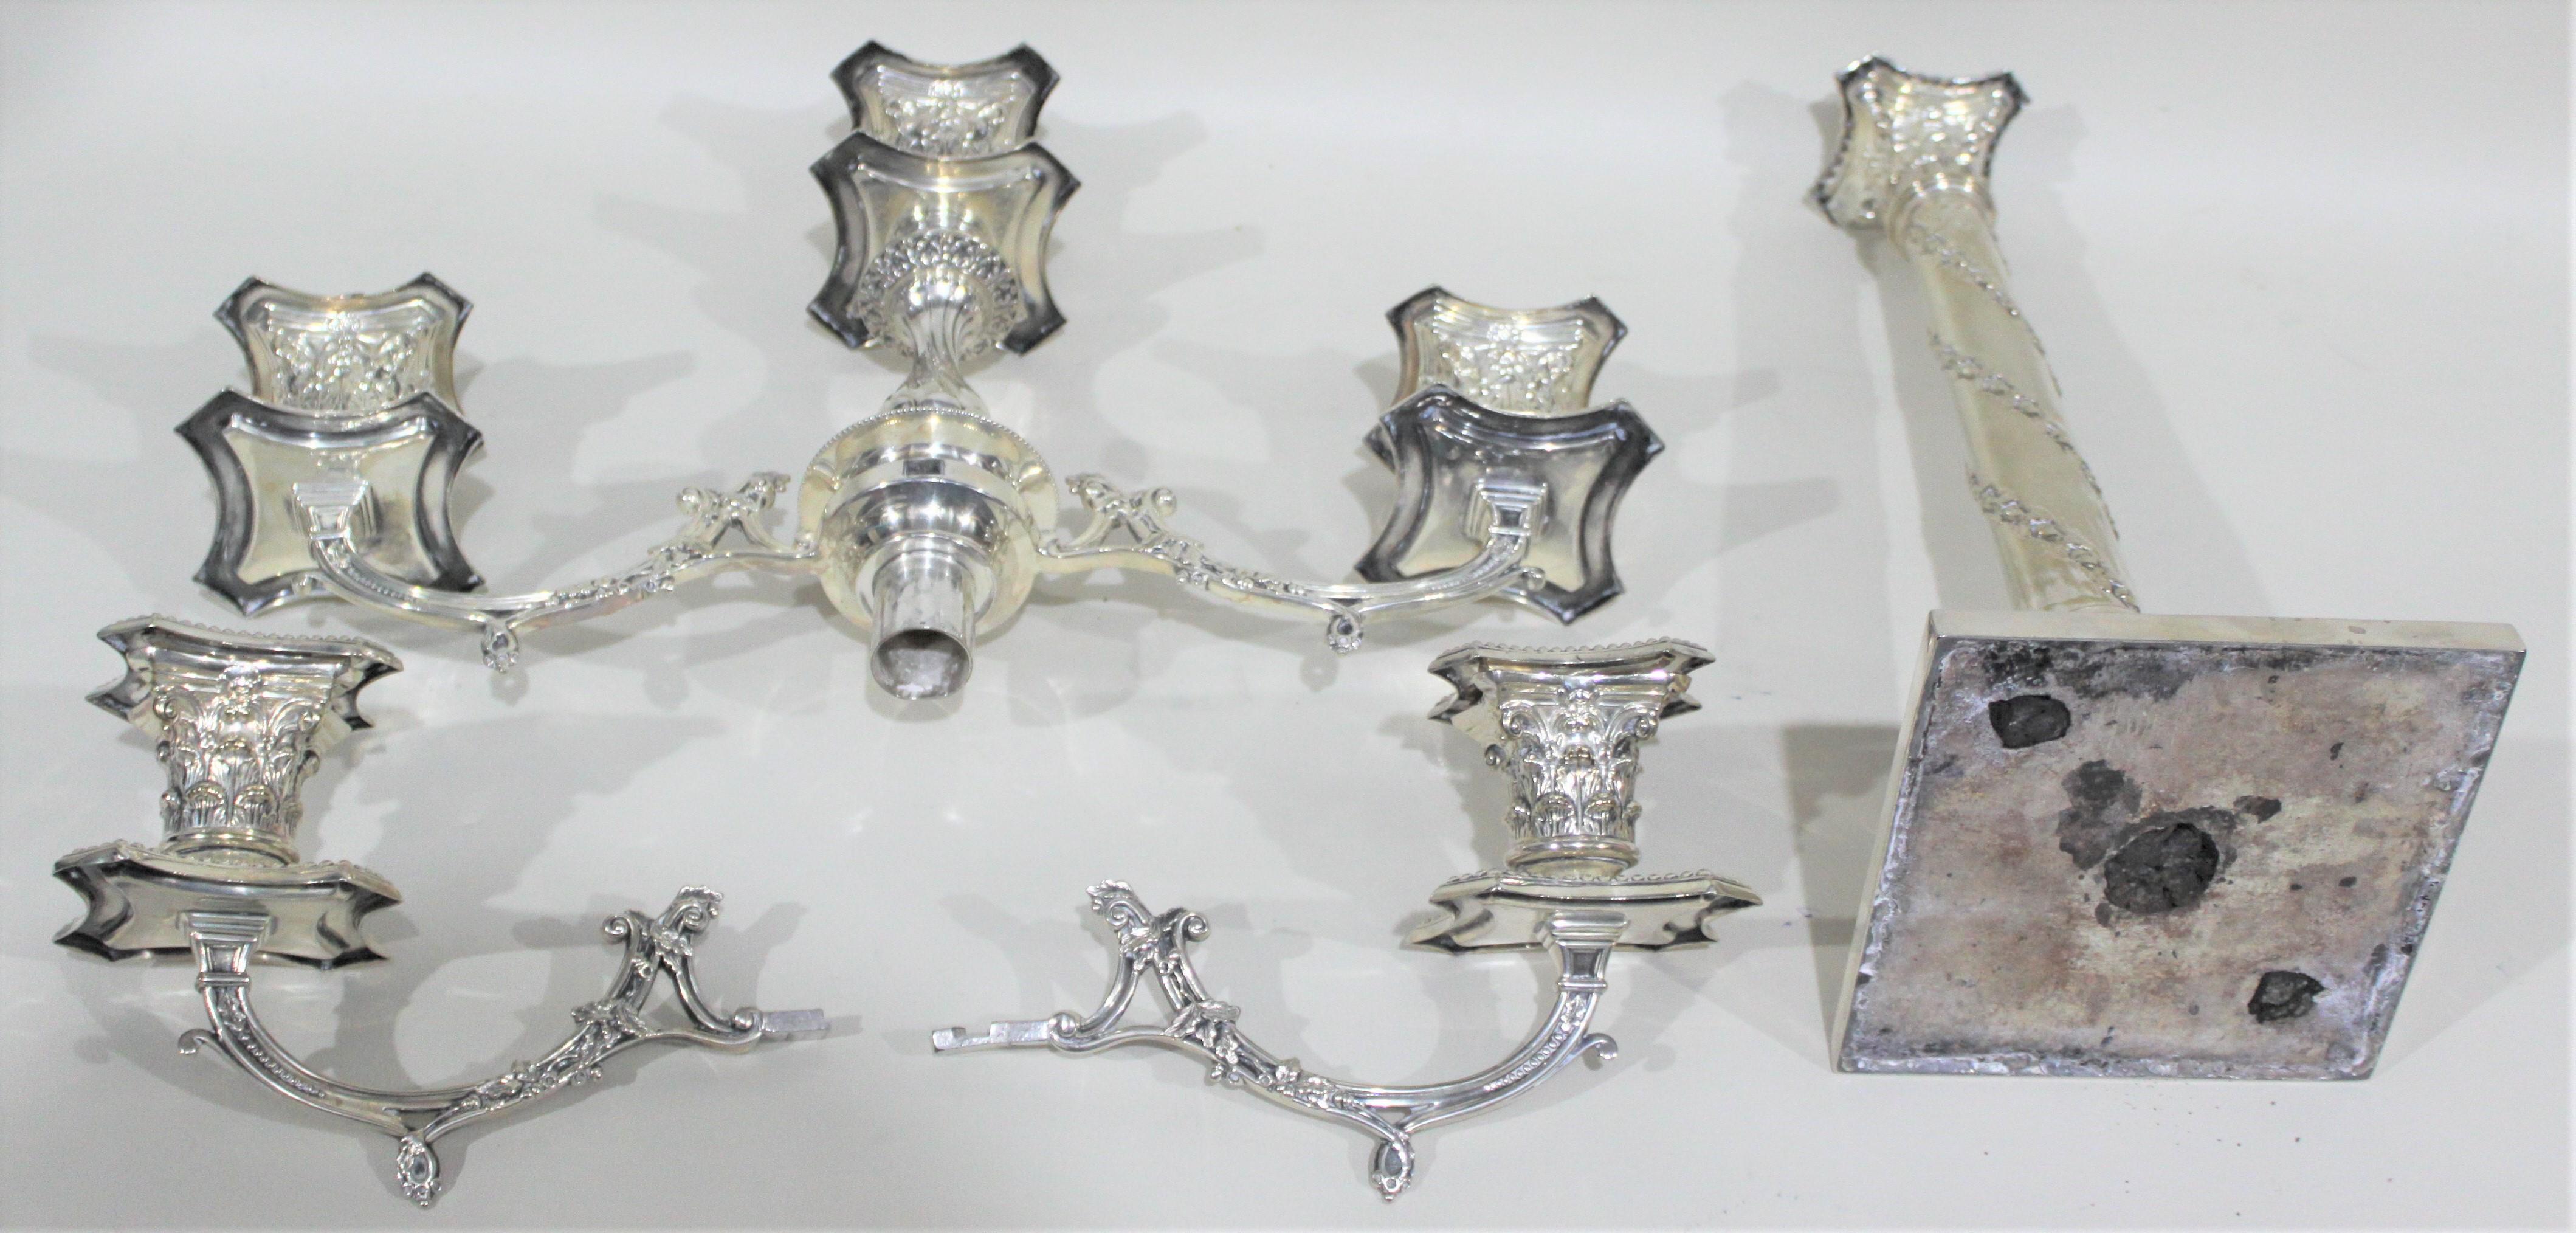 Antique Victorian Silver Plated Convertible Candelabra For Sale 11